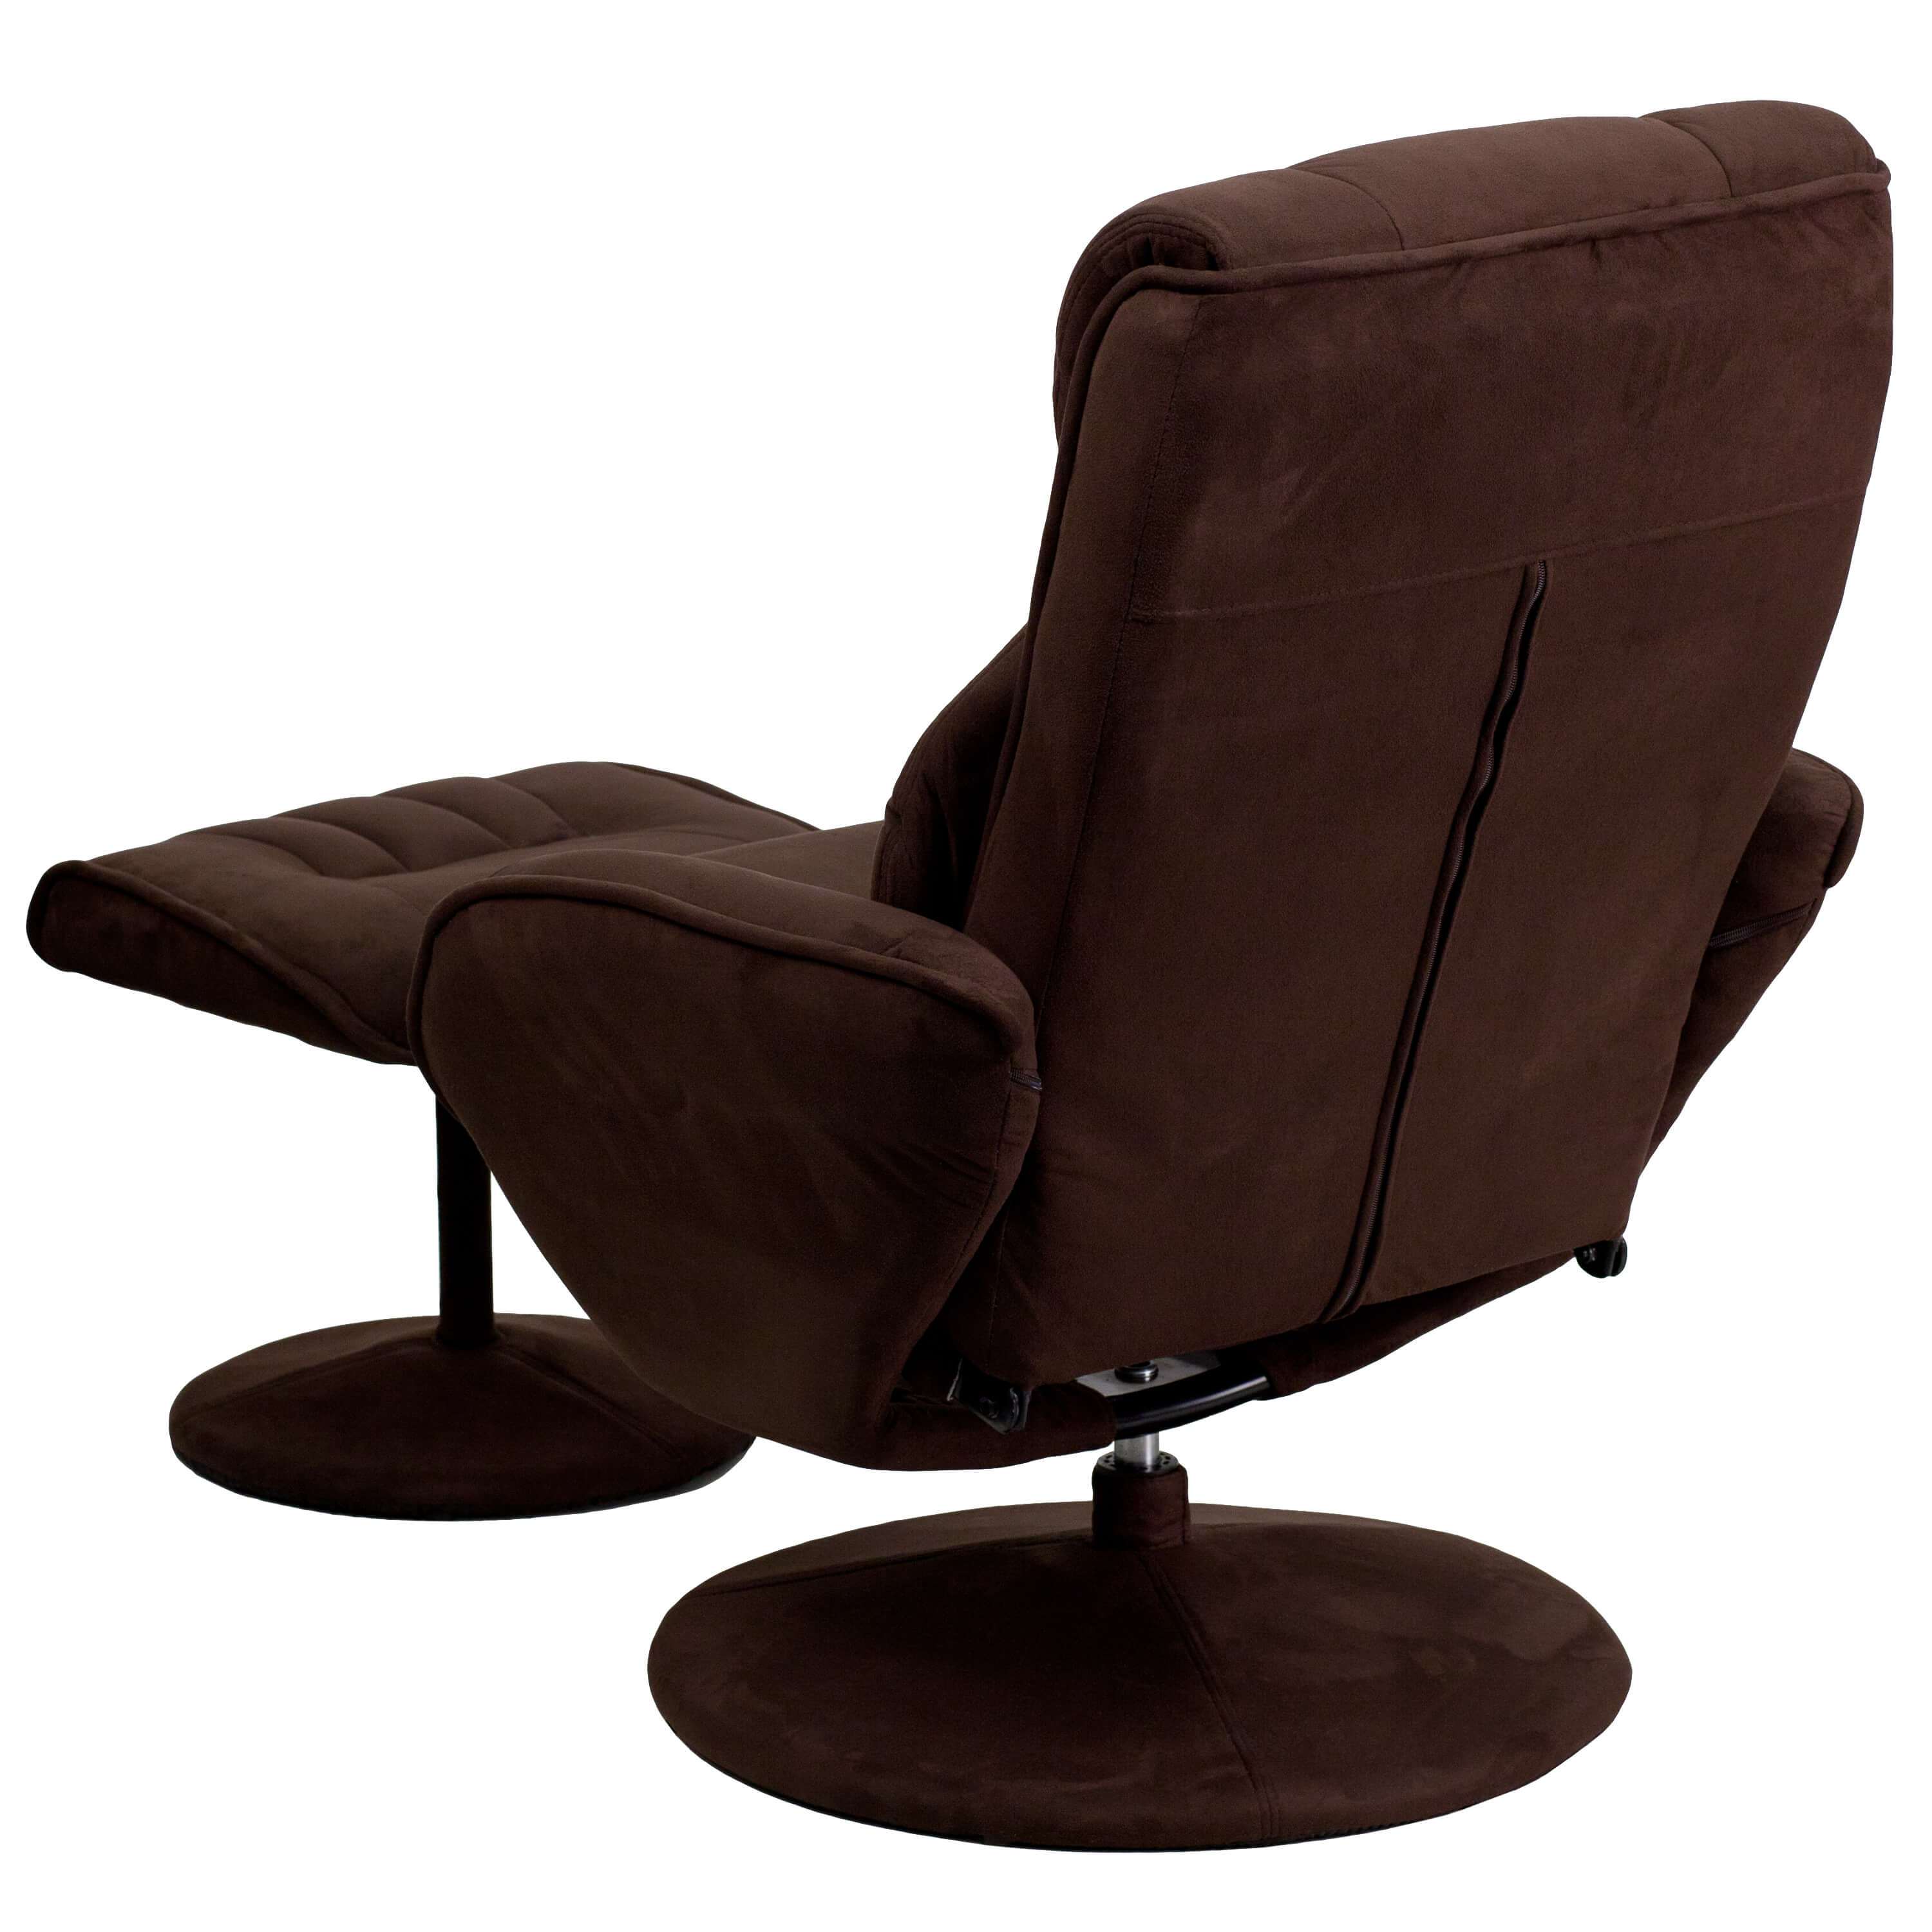 Brown recliner chair back view